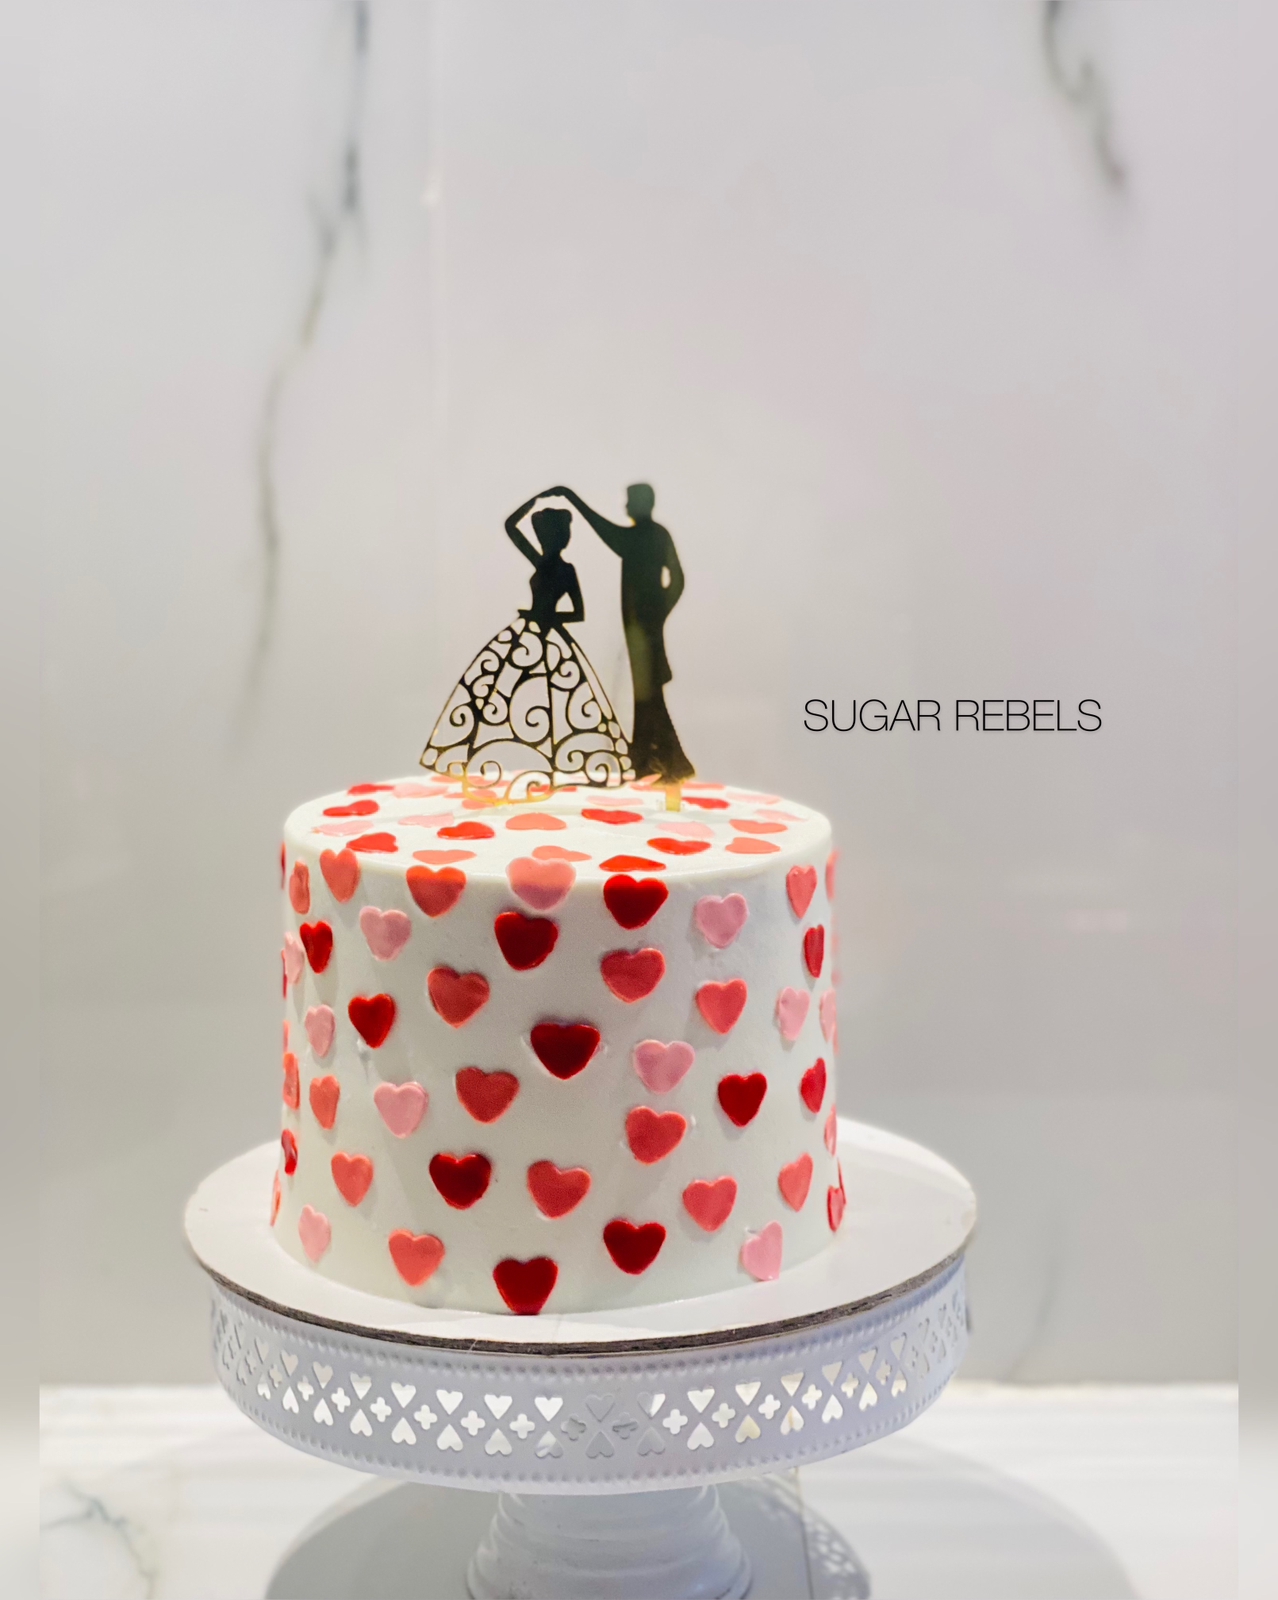 Engagement Proposal Cake Topper - Will You Marry Me? Wedding or Engagement  Cake Decoration - Custom Made in Melbourne